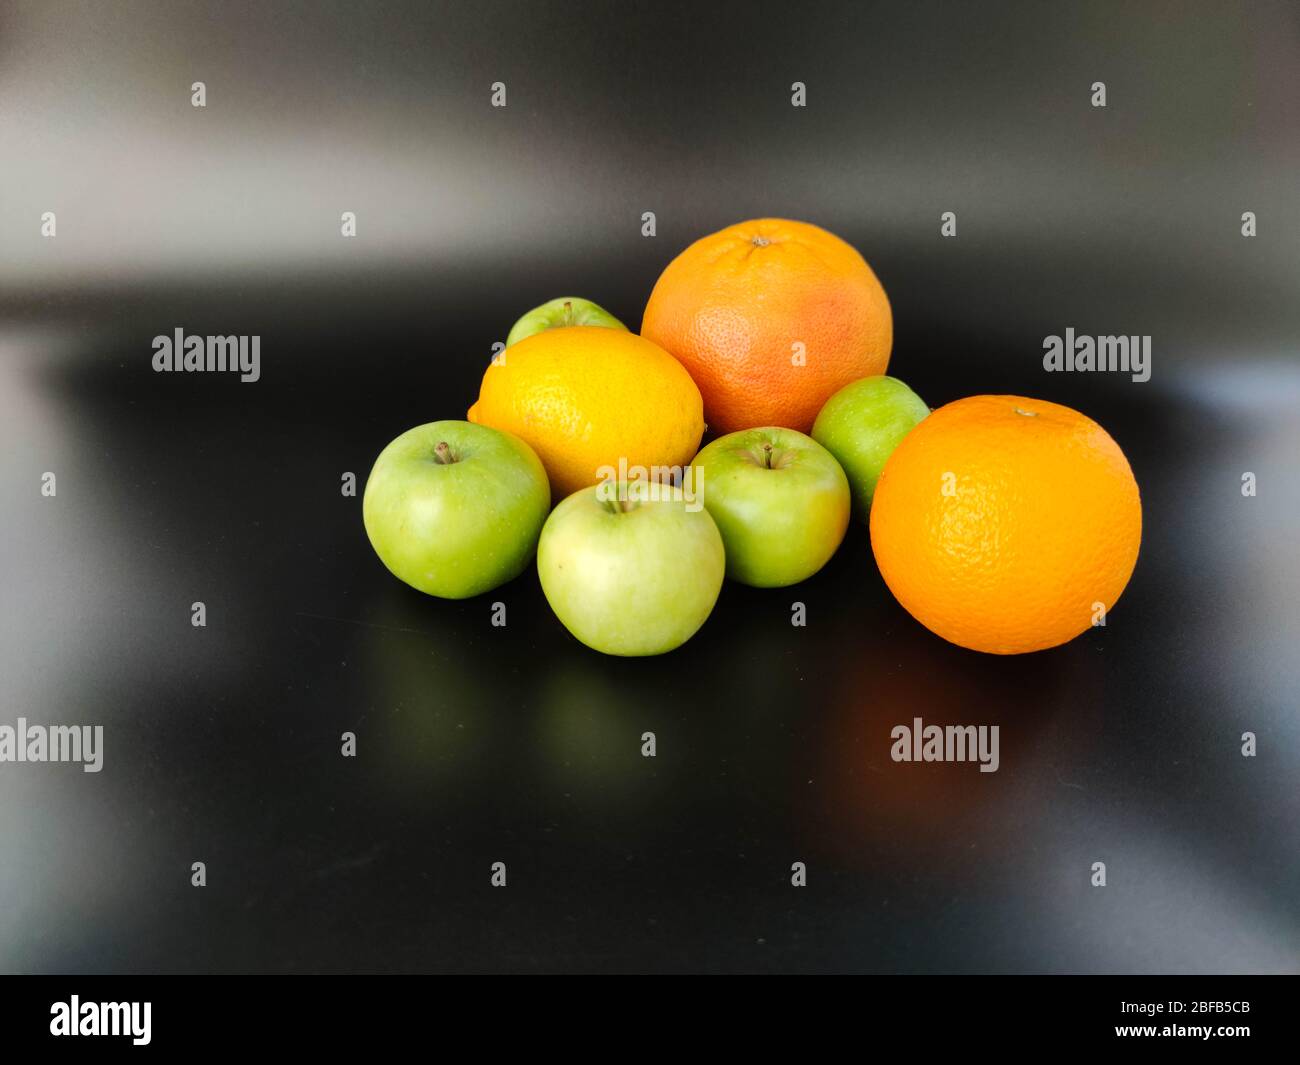 Whole fruits green apples, orange, grapefruit and lemon on black background. Concept - vegetarian and healthy food to improve the immunity Stock photo Stock Photo